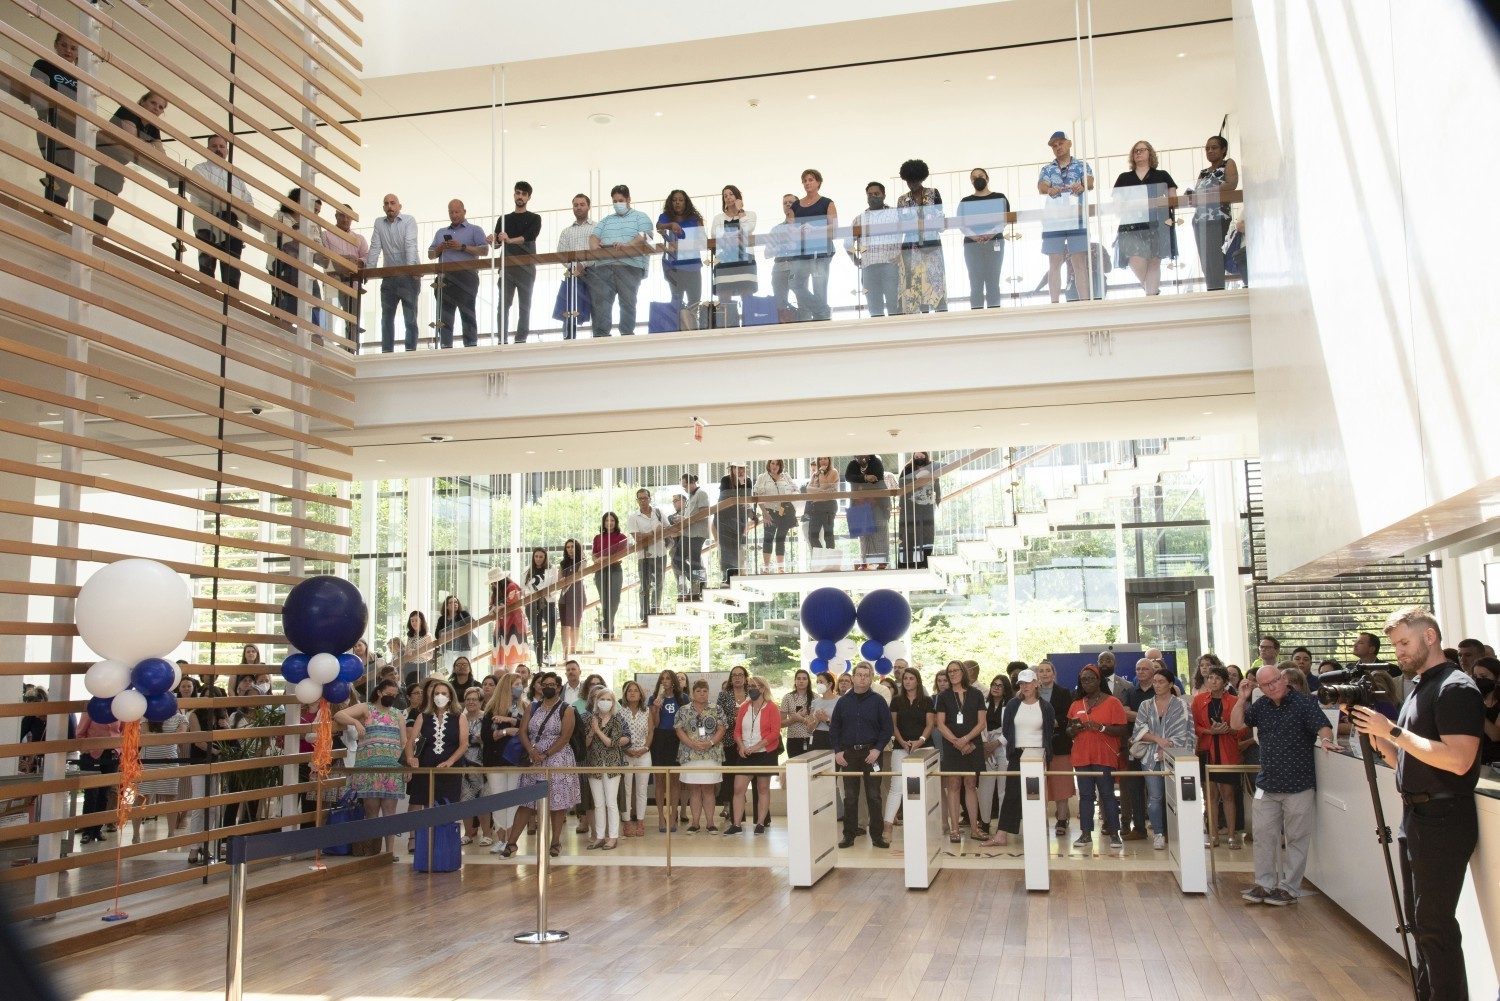 Our employees celebrating the grand re-opening of our refurbished HQ in Madison, NJ.